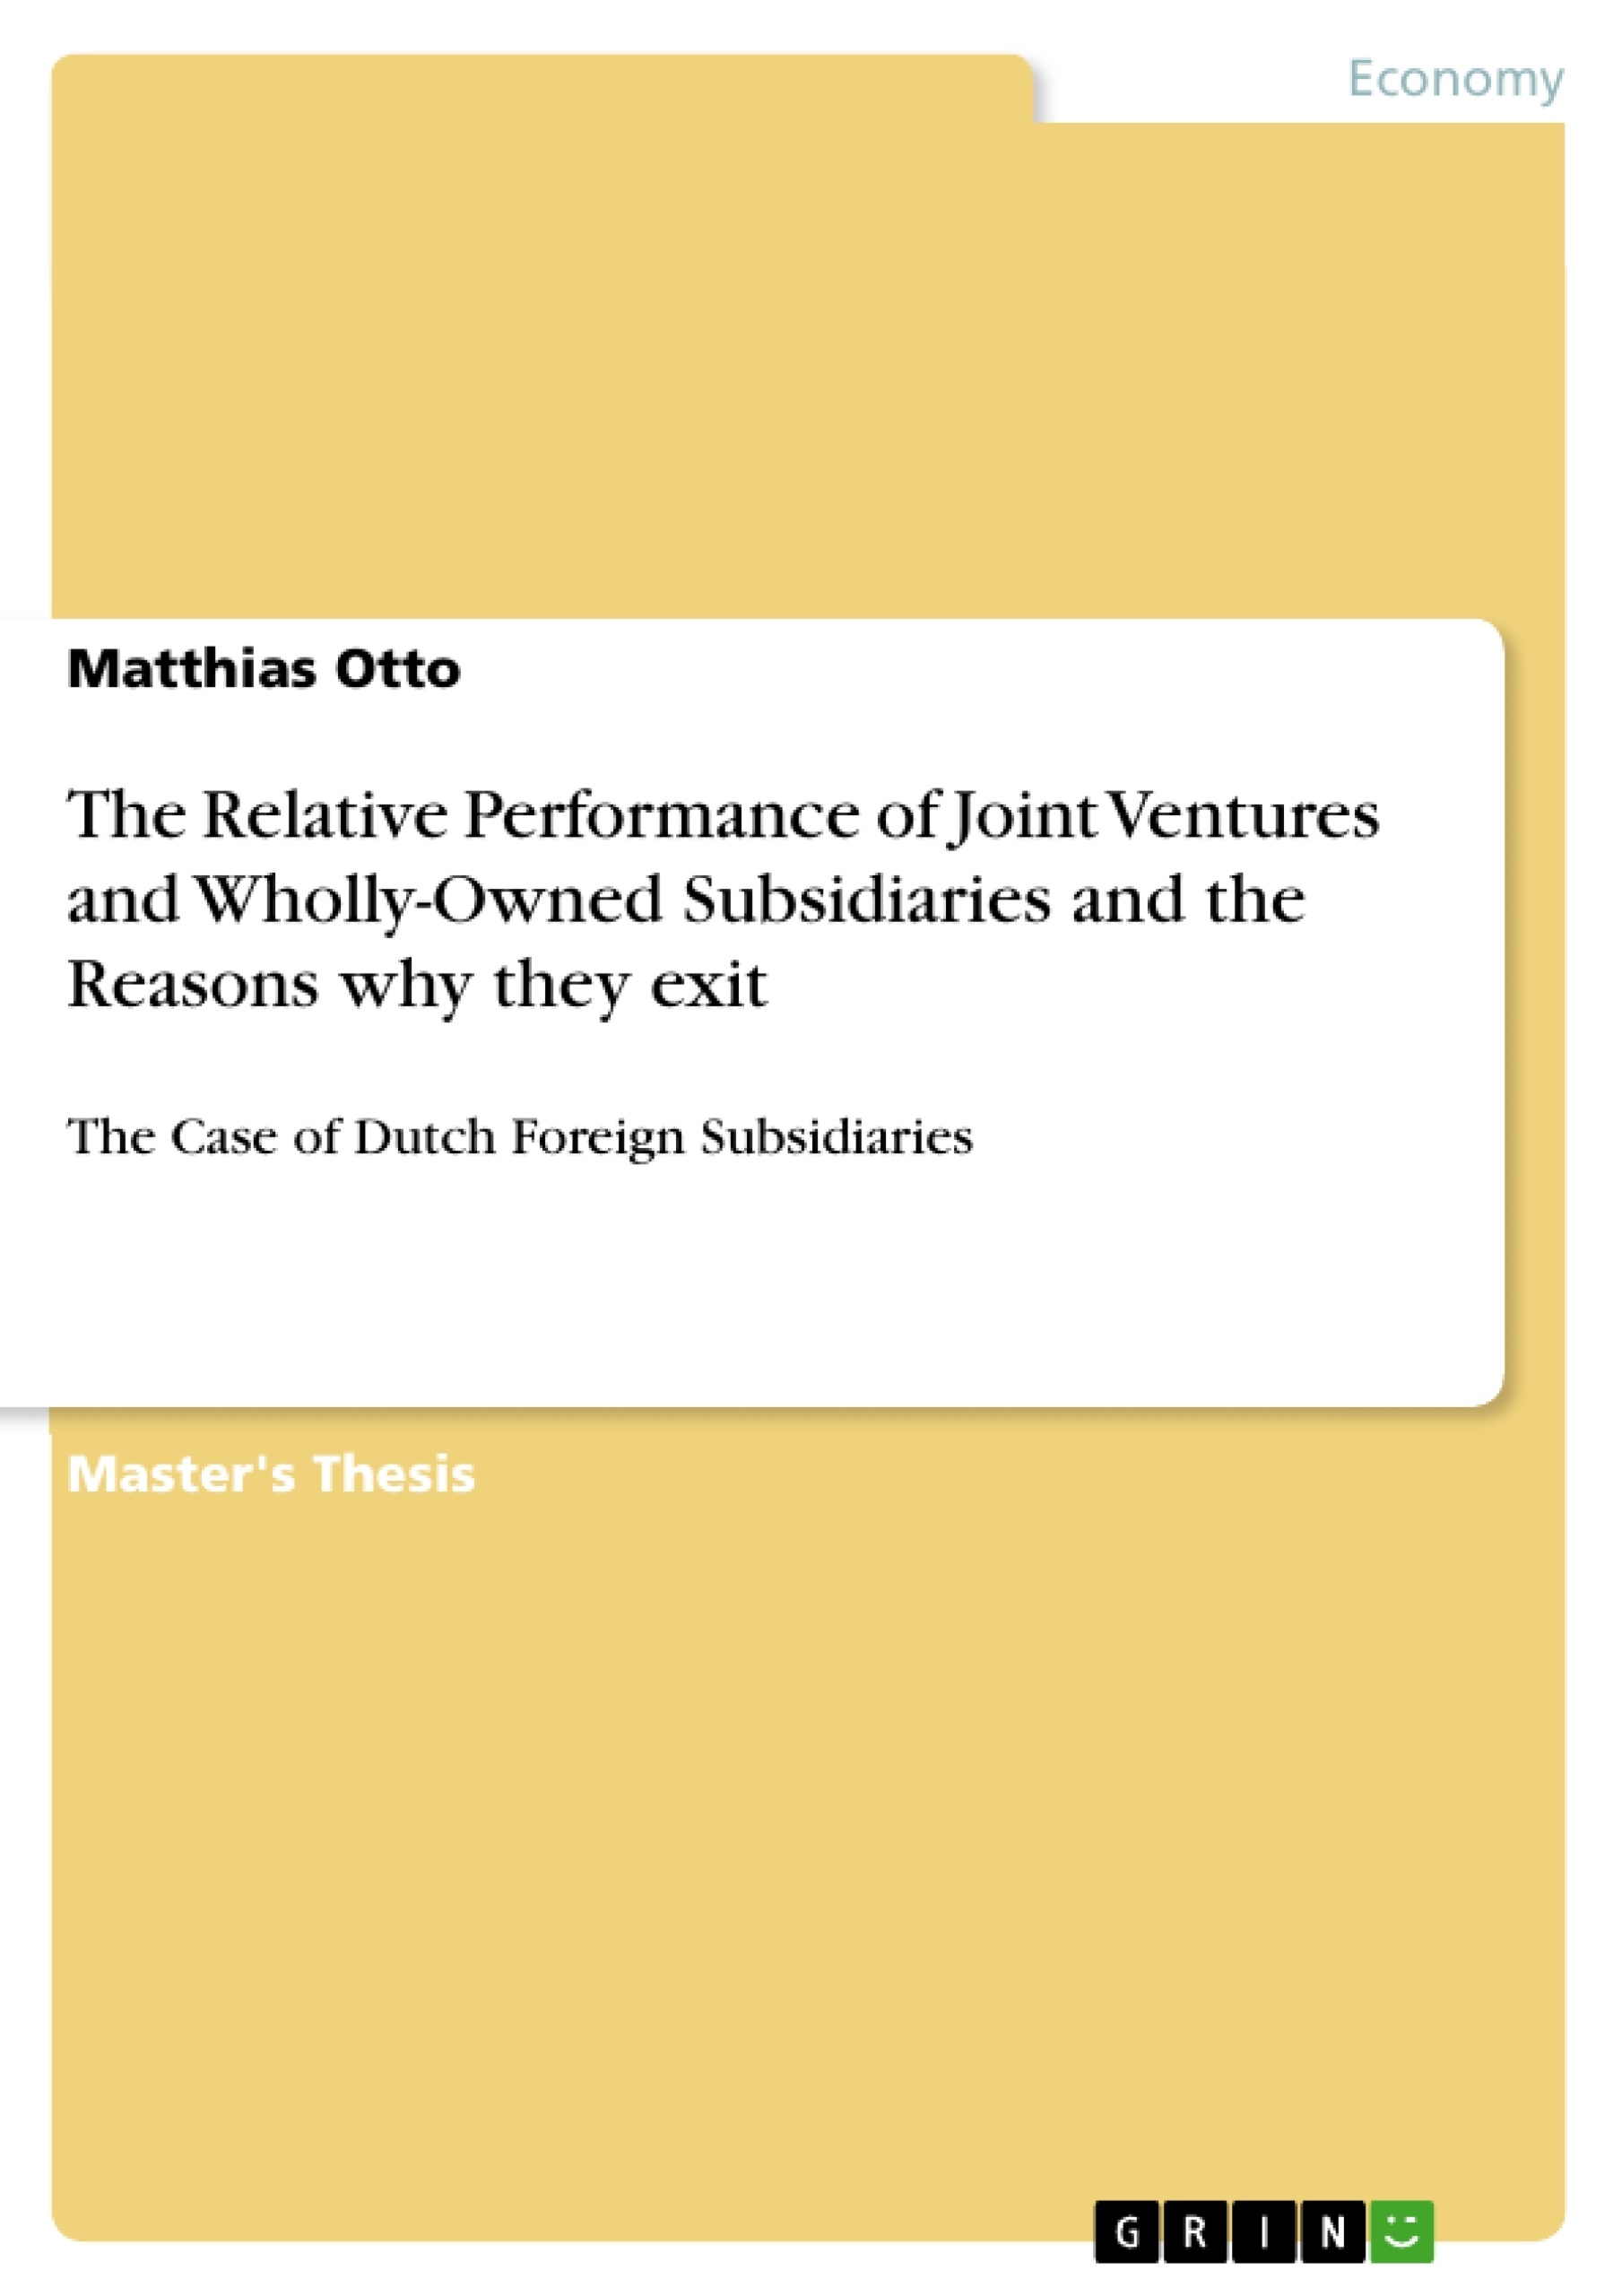 Title: The Relative Performance of Joint Ventures and Wholly-Owned Subsidiaries and the Reasons why they exit